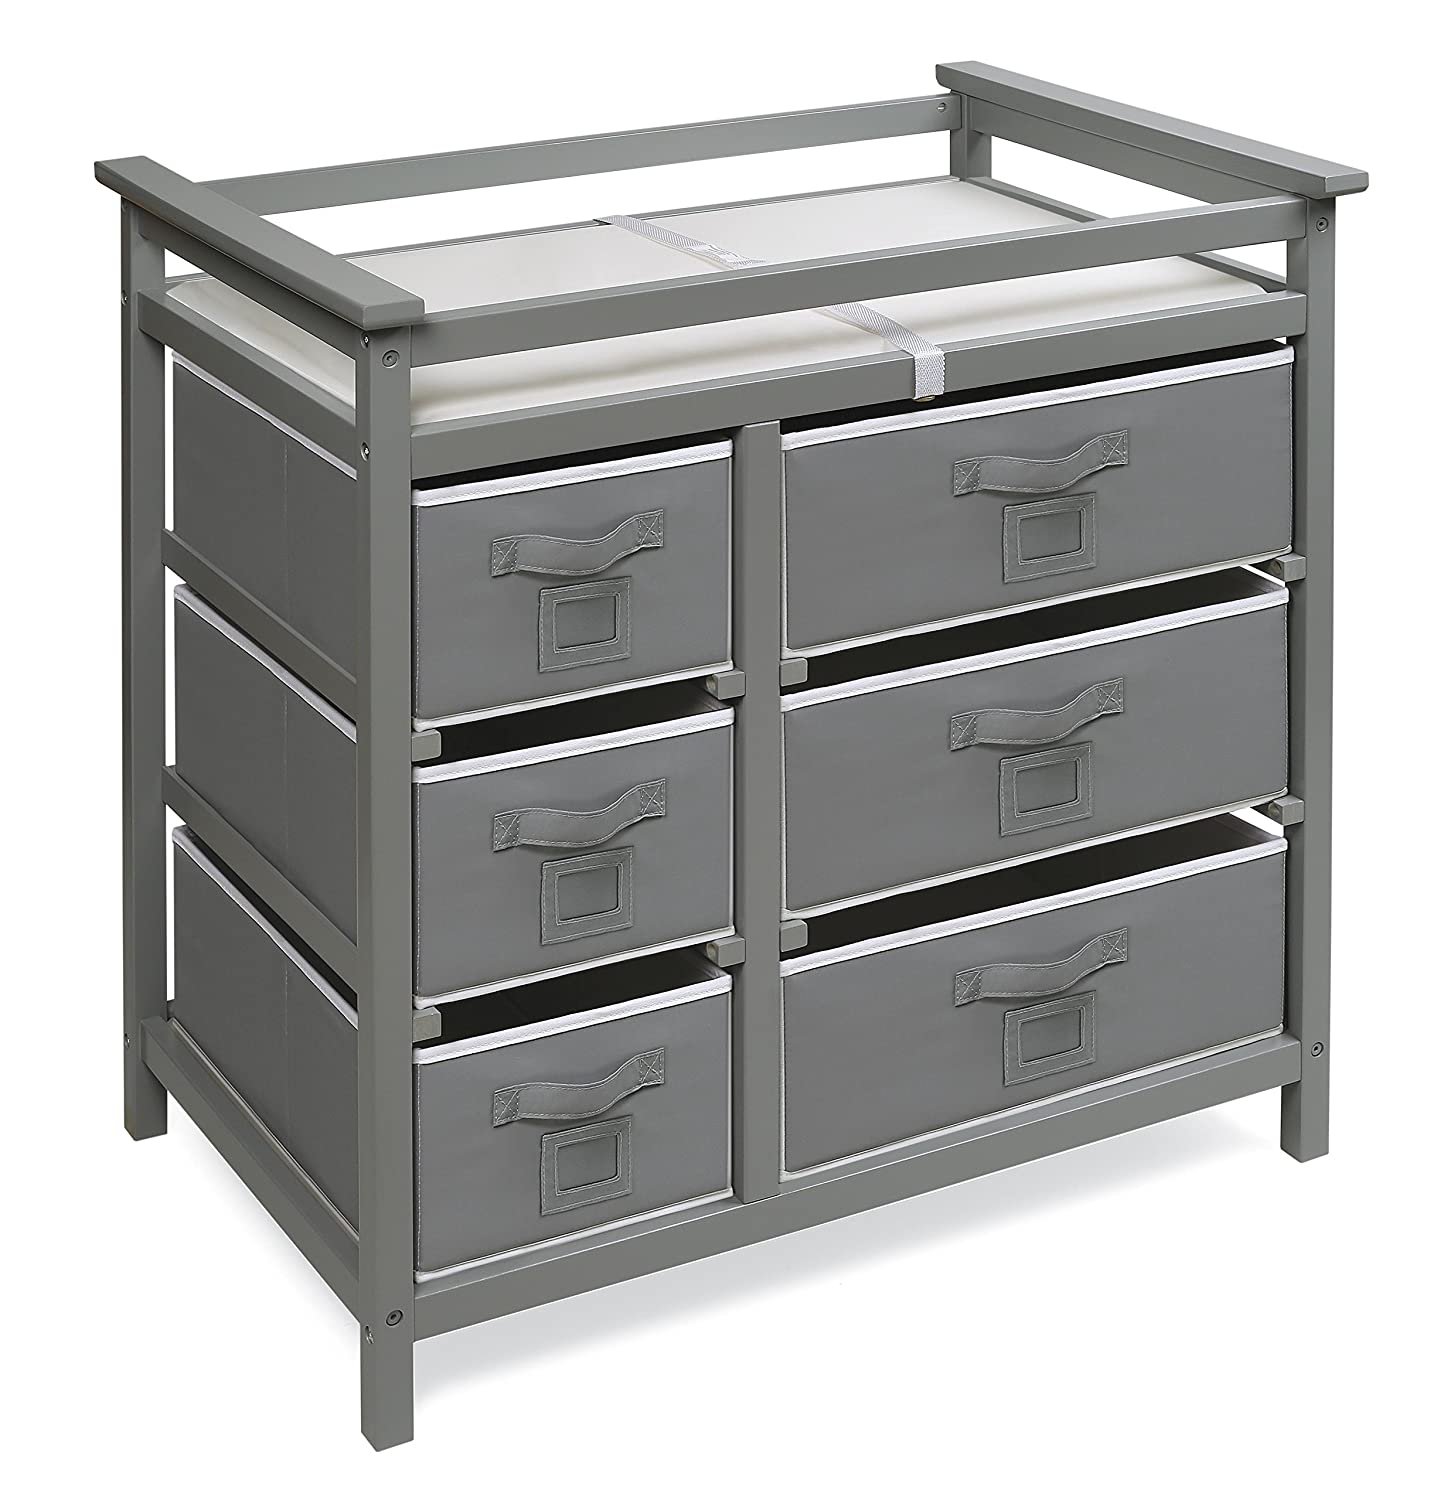 8. Modern Baby Changing Table with 6 Storage Baskets and Pad